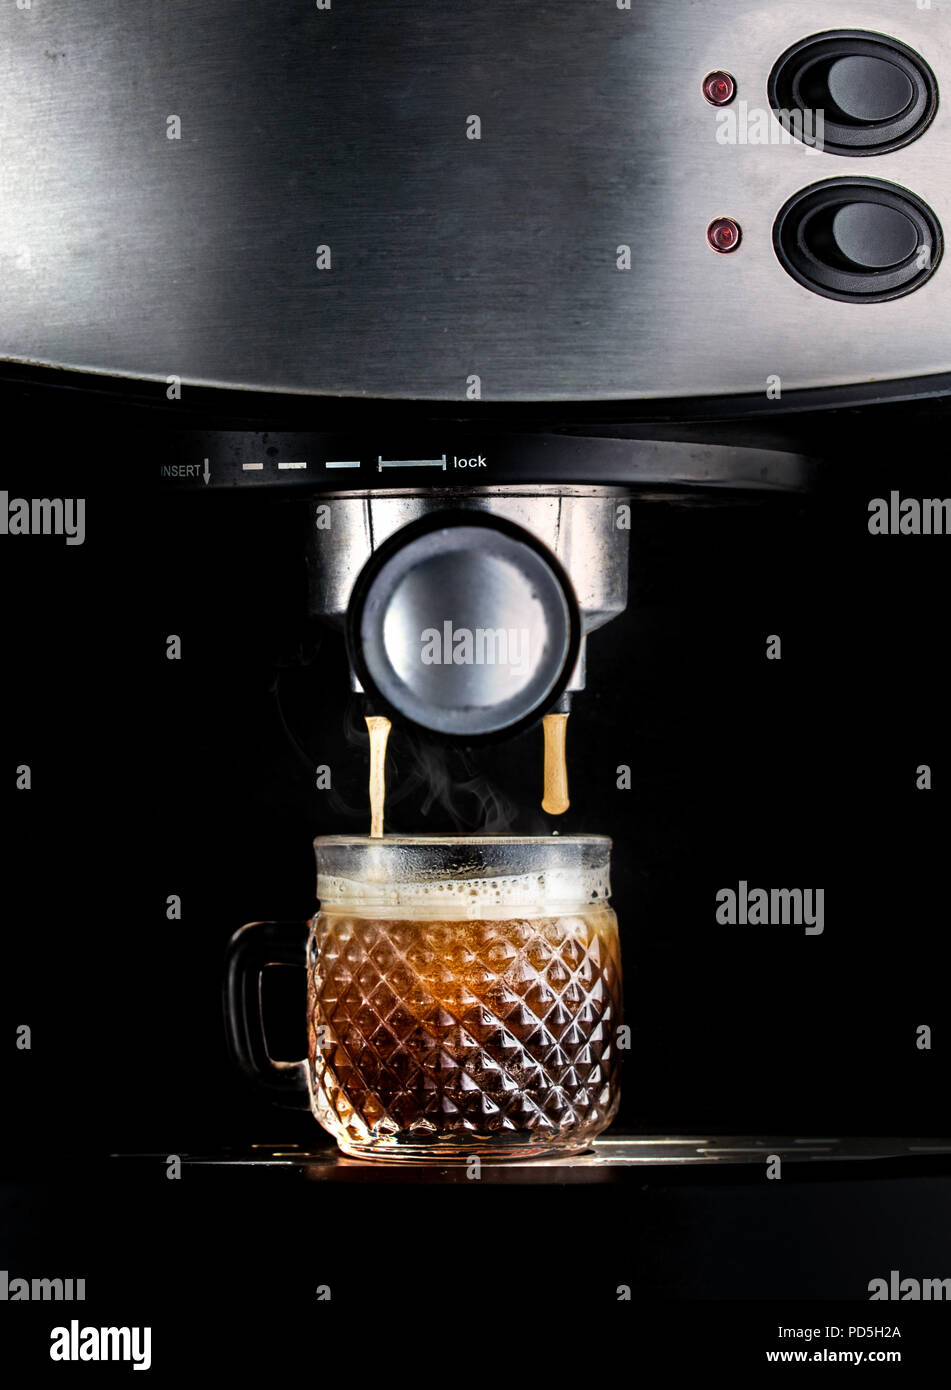 https://c8.alamy.com/comp/PD5H2A/dramatic-shot-of-an-espresso-machine-closeup-brewing-fresh-coffee-on-a-glass-cup-with-steam-smoke-coming-out-PD5H2A.jpg